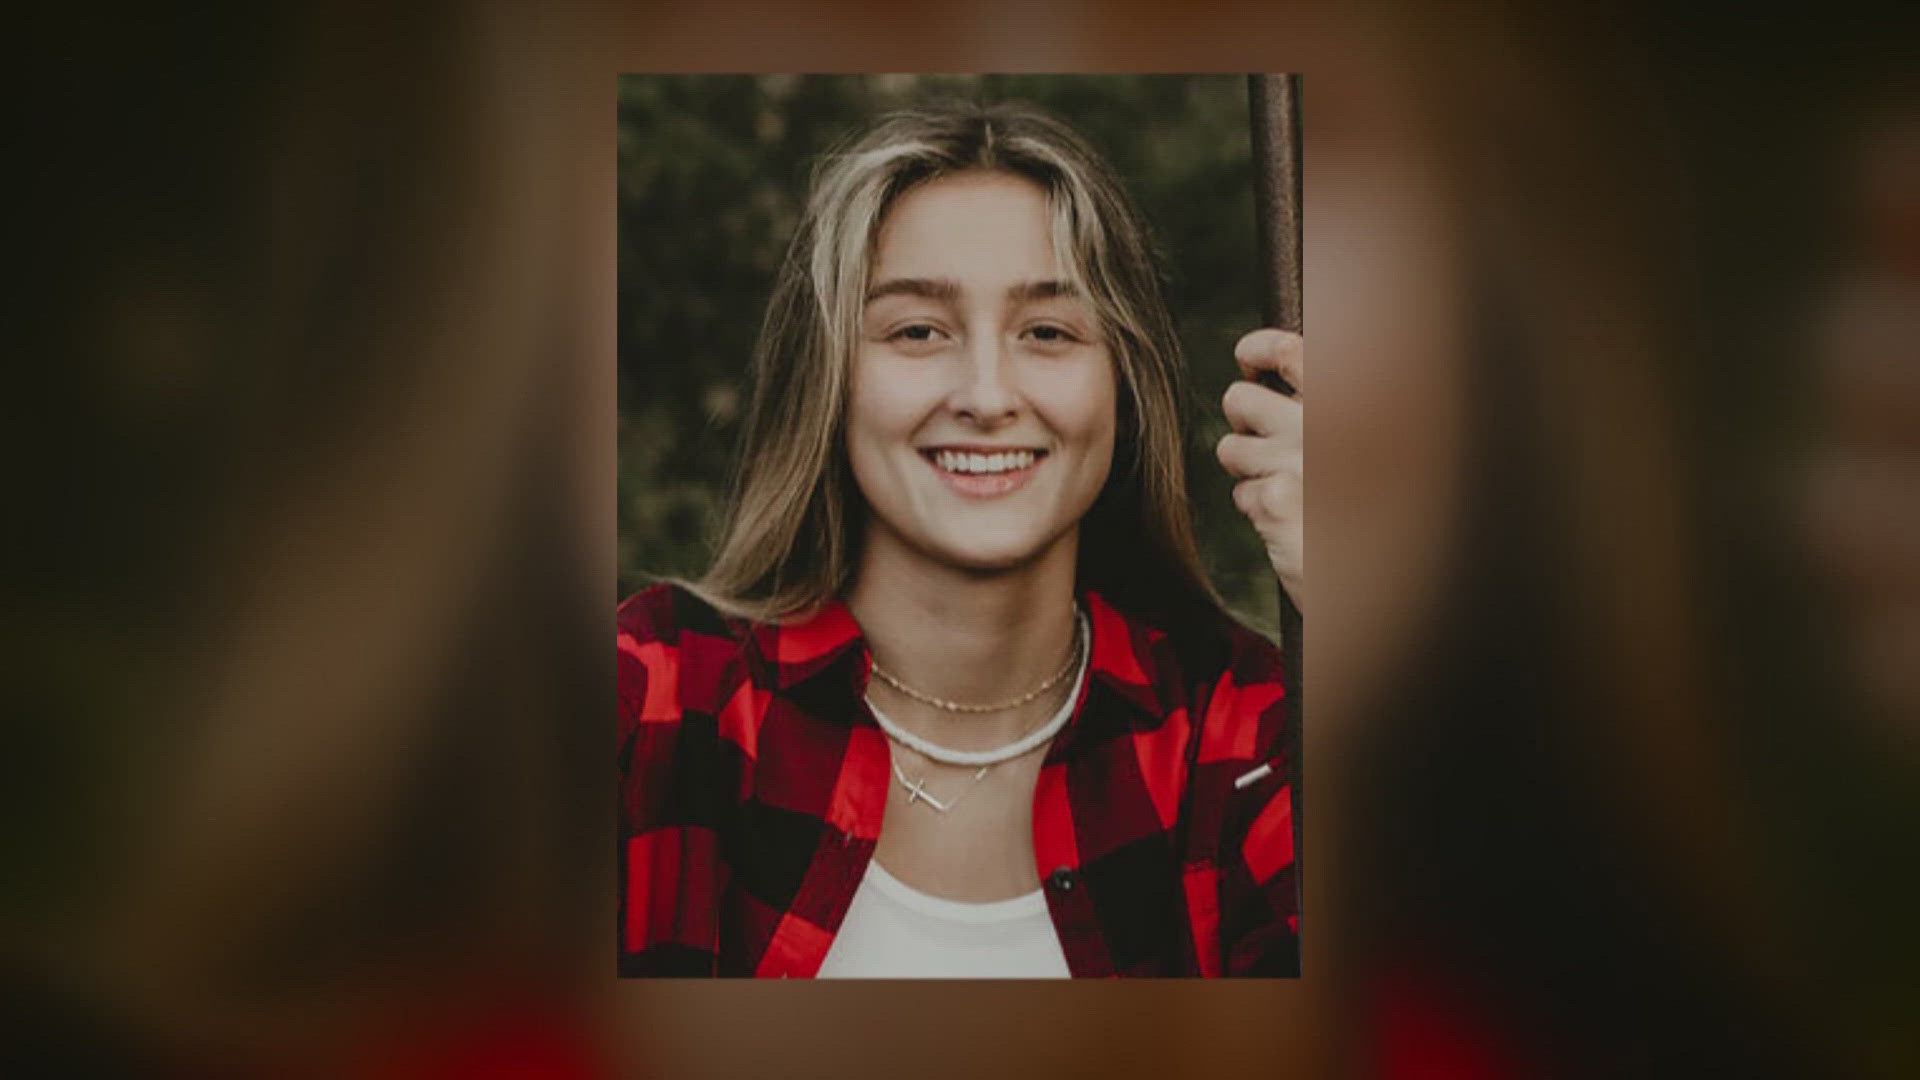 Zachary Kwak pleaded guilty in connection with the killing of Alexa Bartell. Joseph Koenig and Nicholas Karol-Chick still face charges for the April 2023 death.